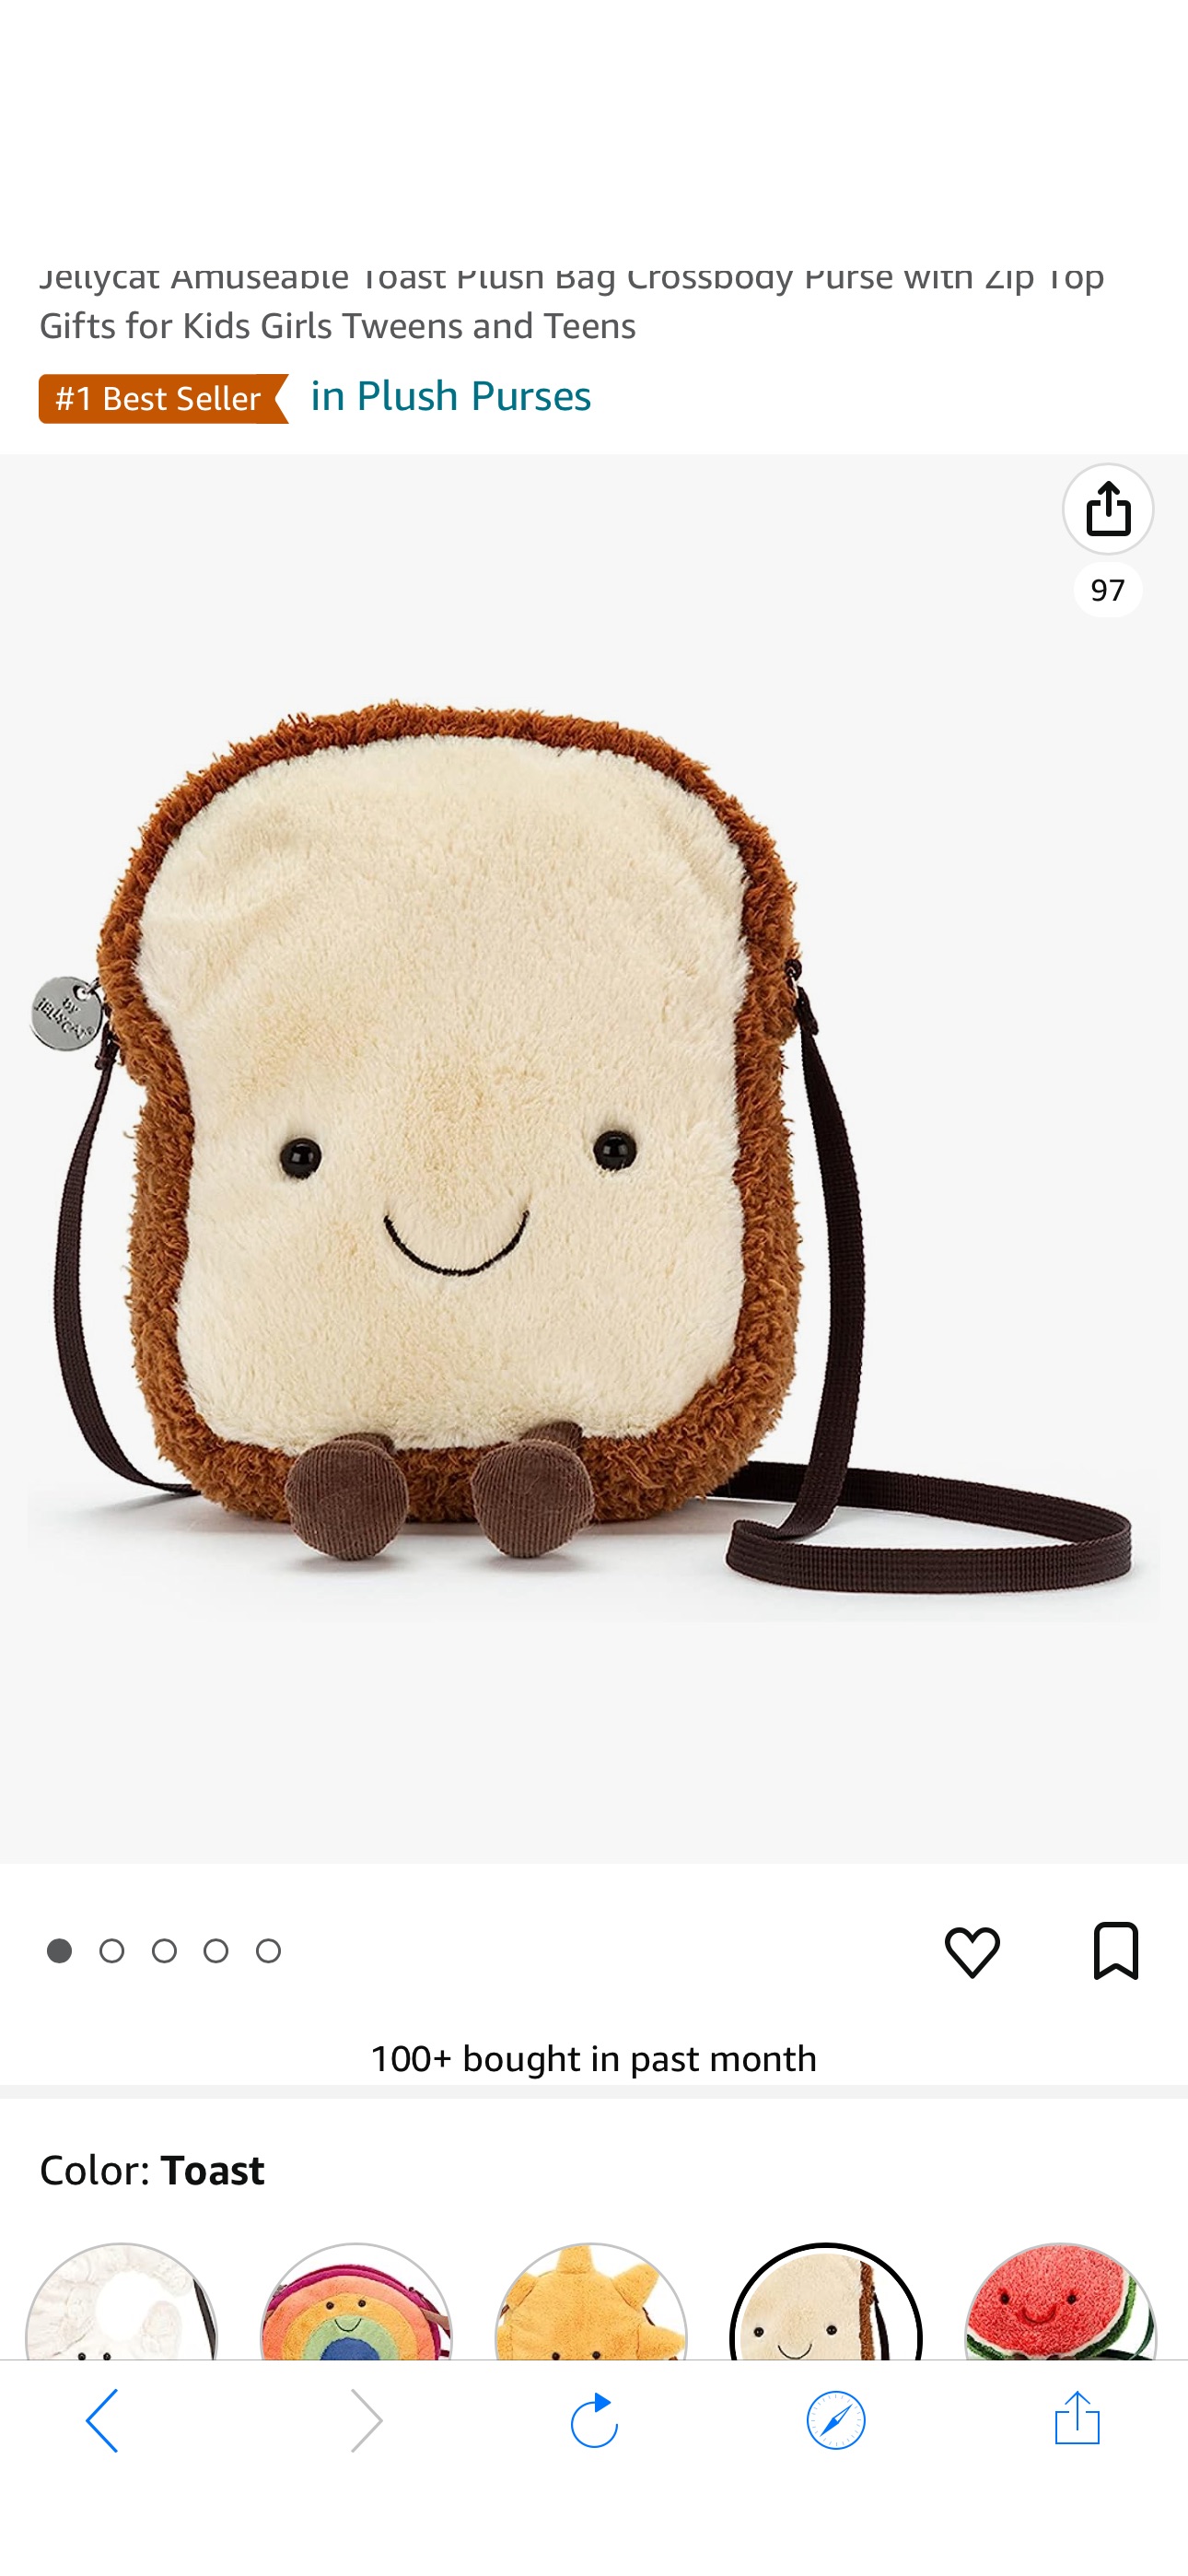 Amazon.com: Jellycat Amuseable Coffee-To-Go Plush Bag Crossbody Purse with Zip Top Gifts for Kids Girls Tweens and Teens : Toys & Games